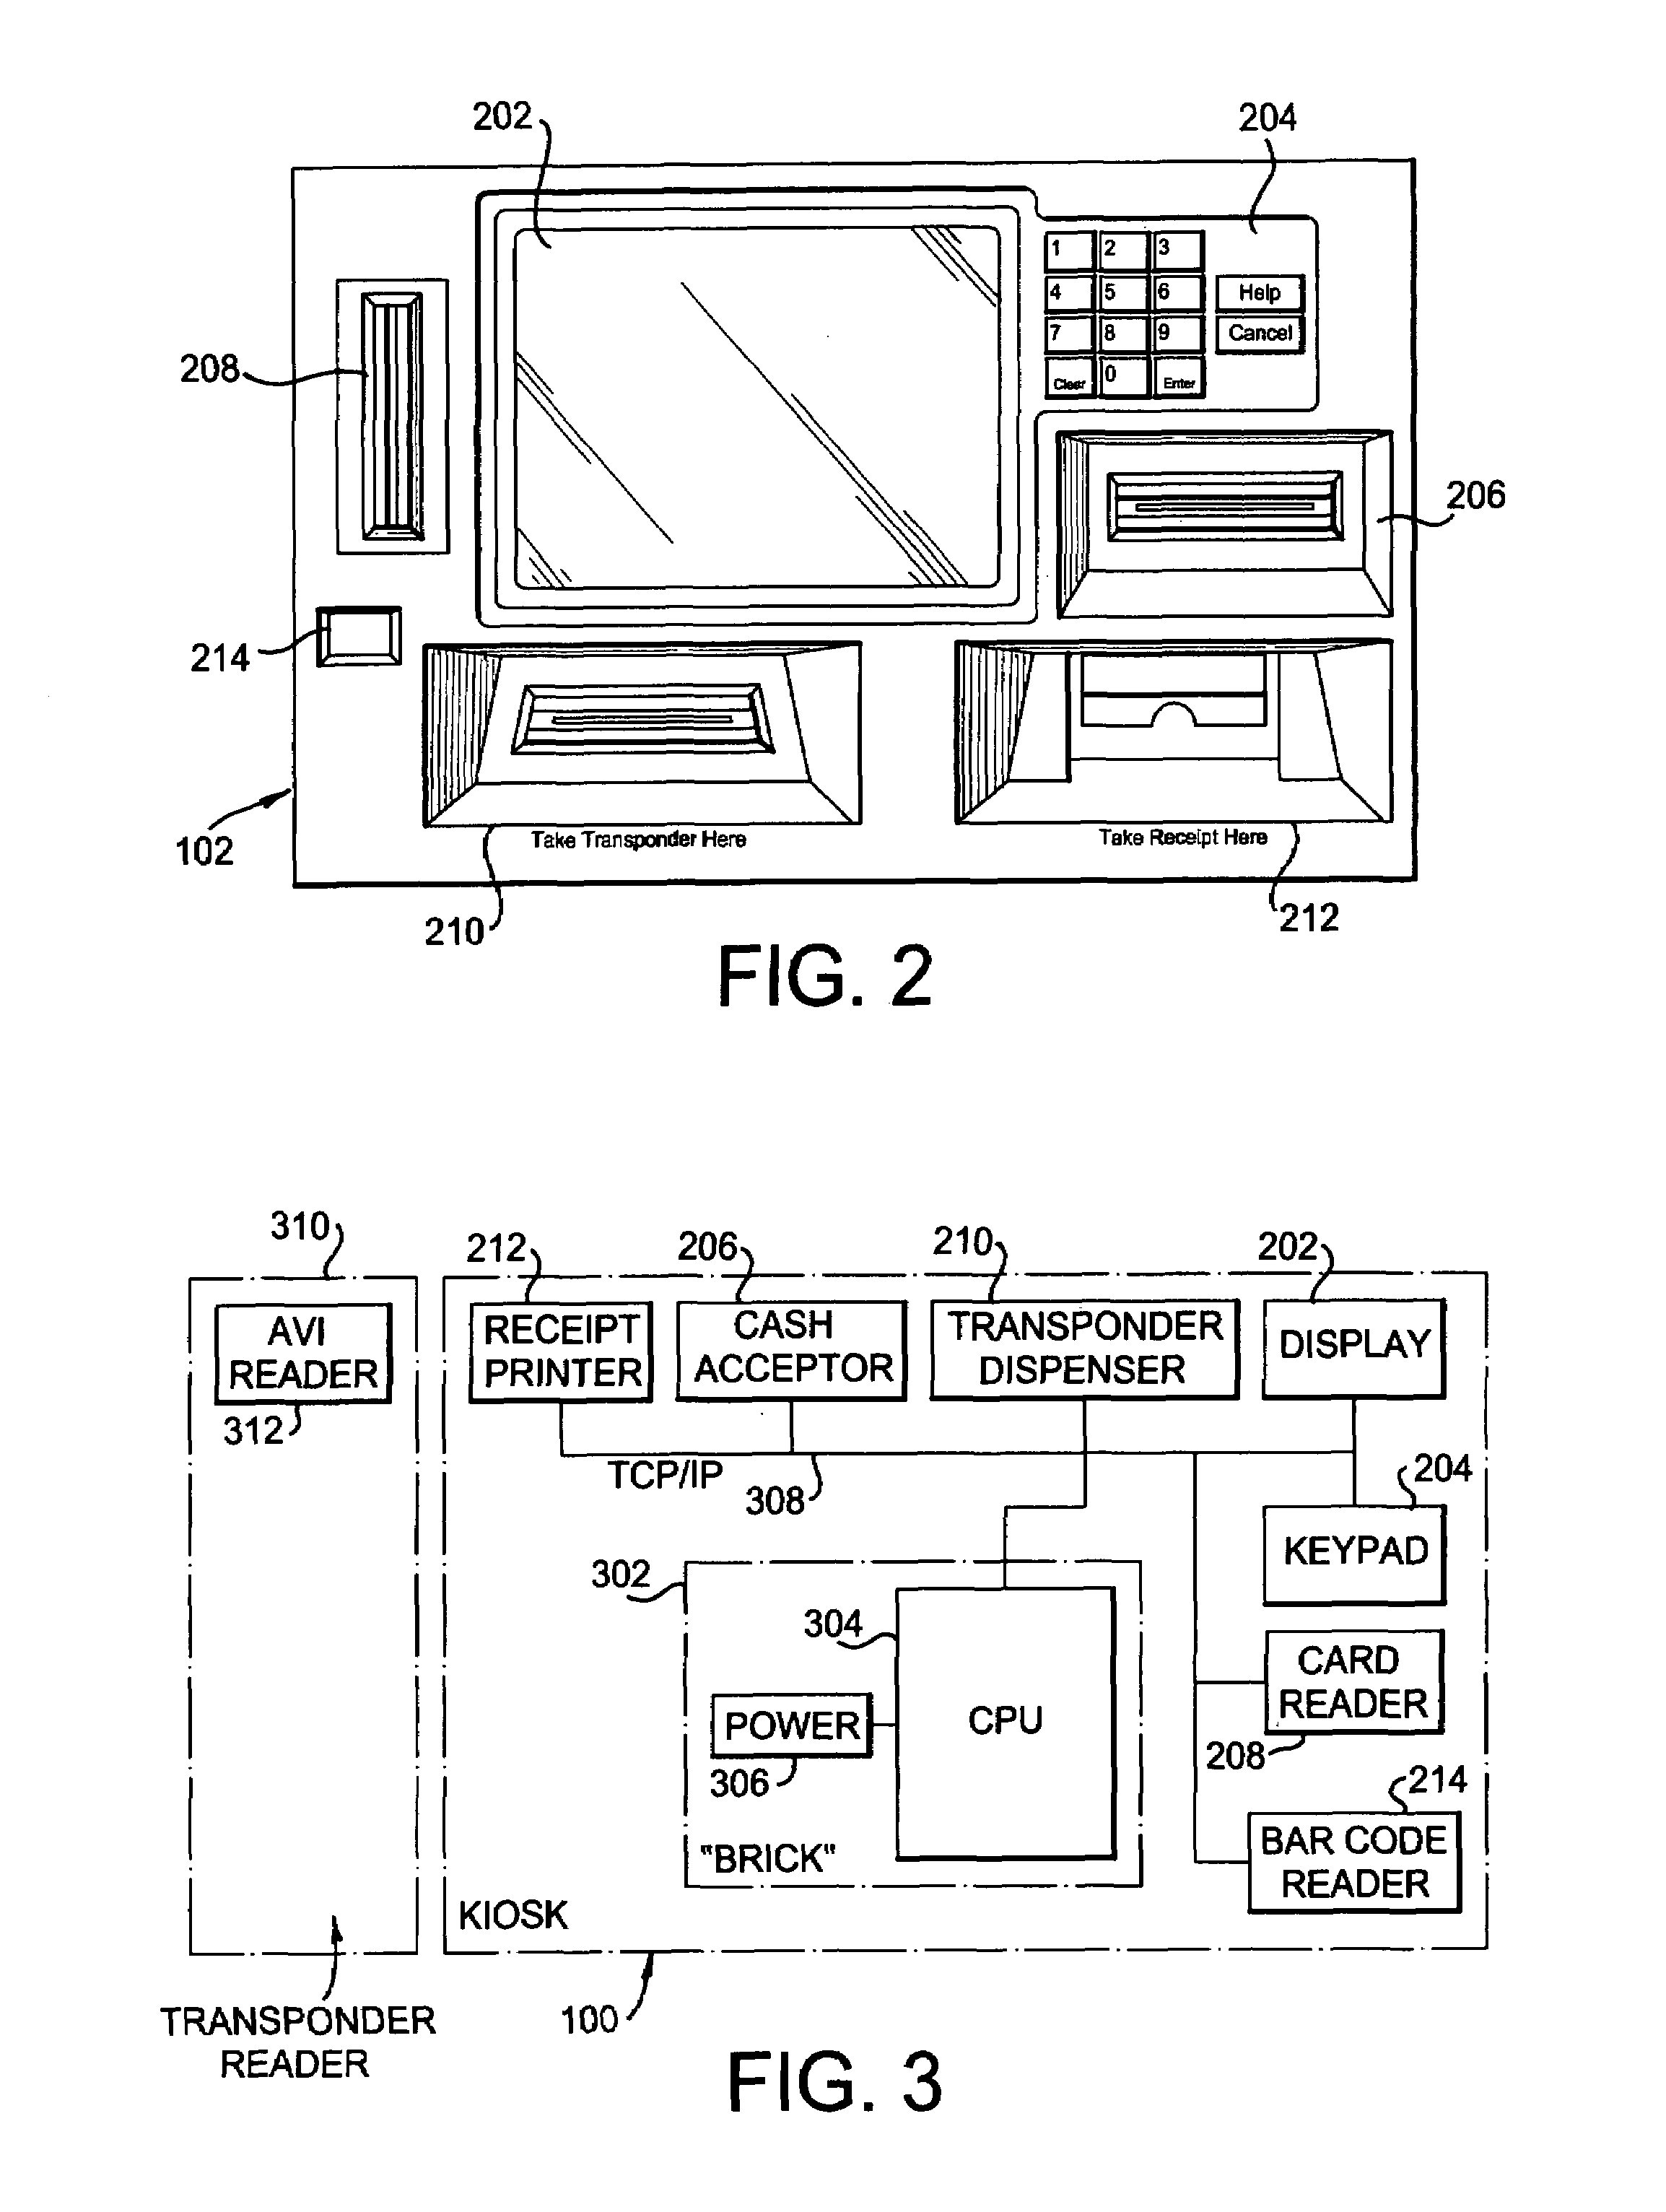 Method of enrolling in an electronic toll or payment collection system